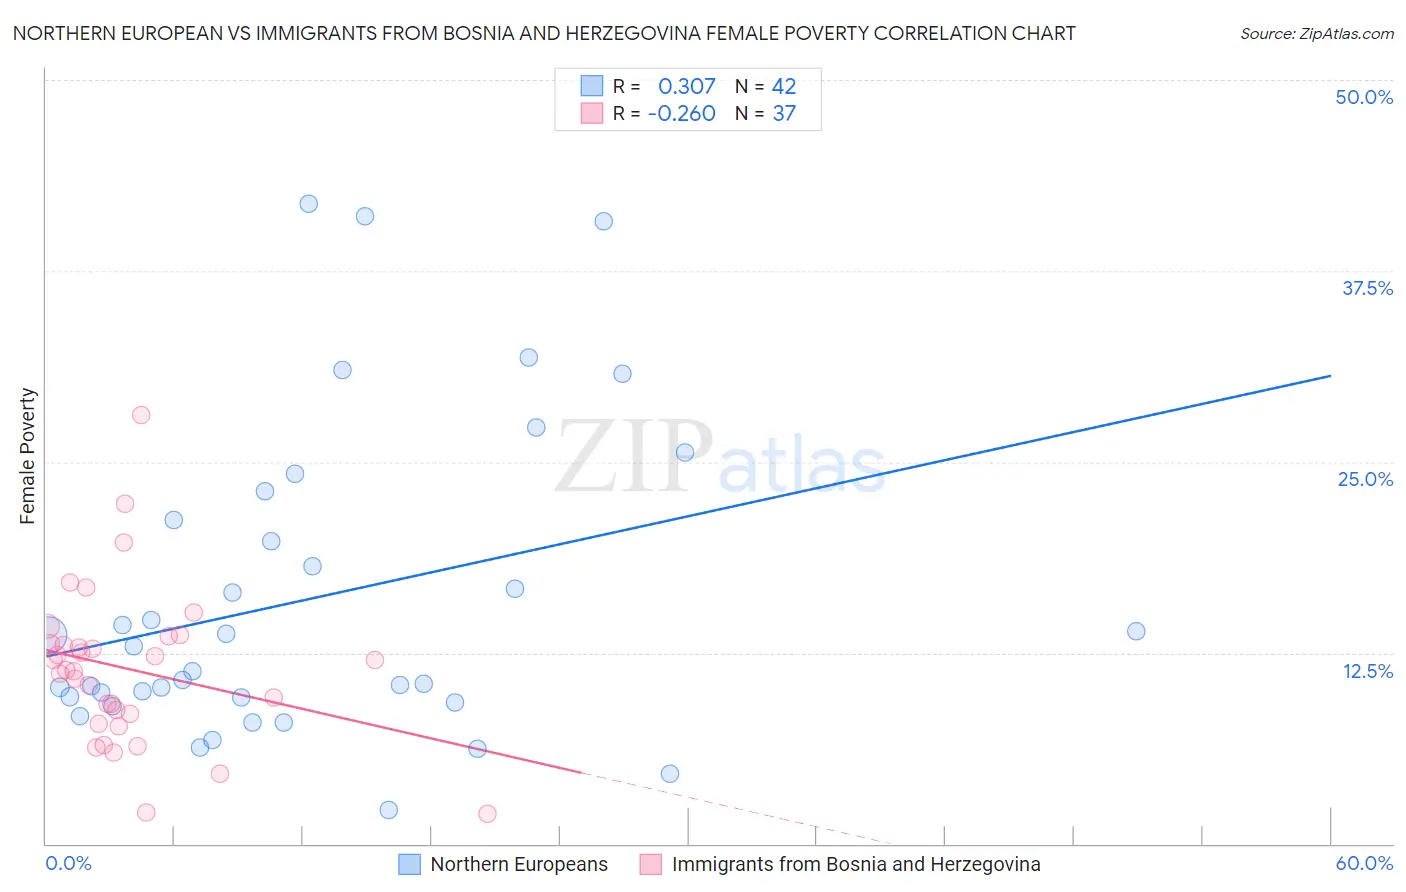 Northern European vs Immigrants from Bosnia and Herzegovina Female Poverty